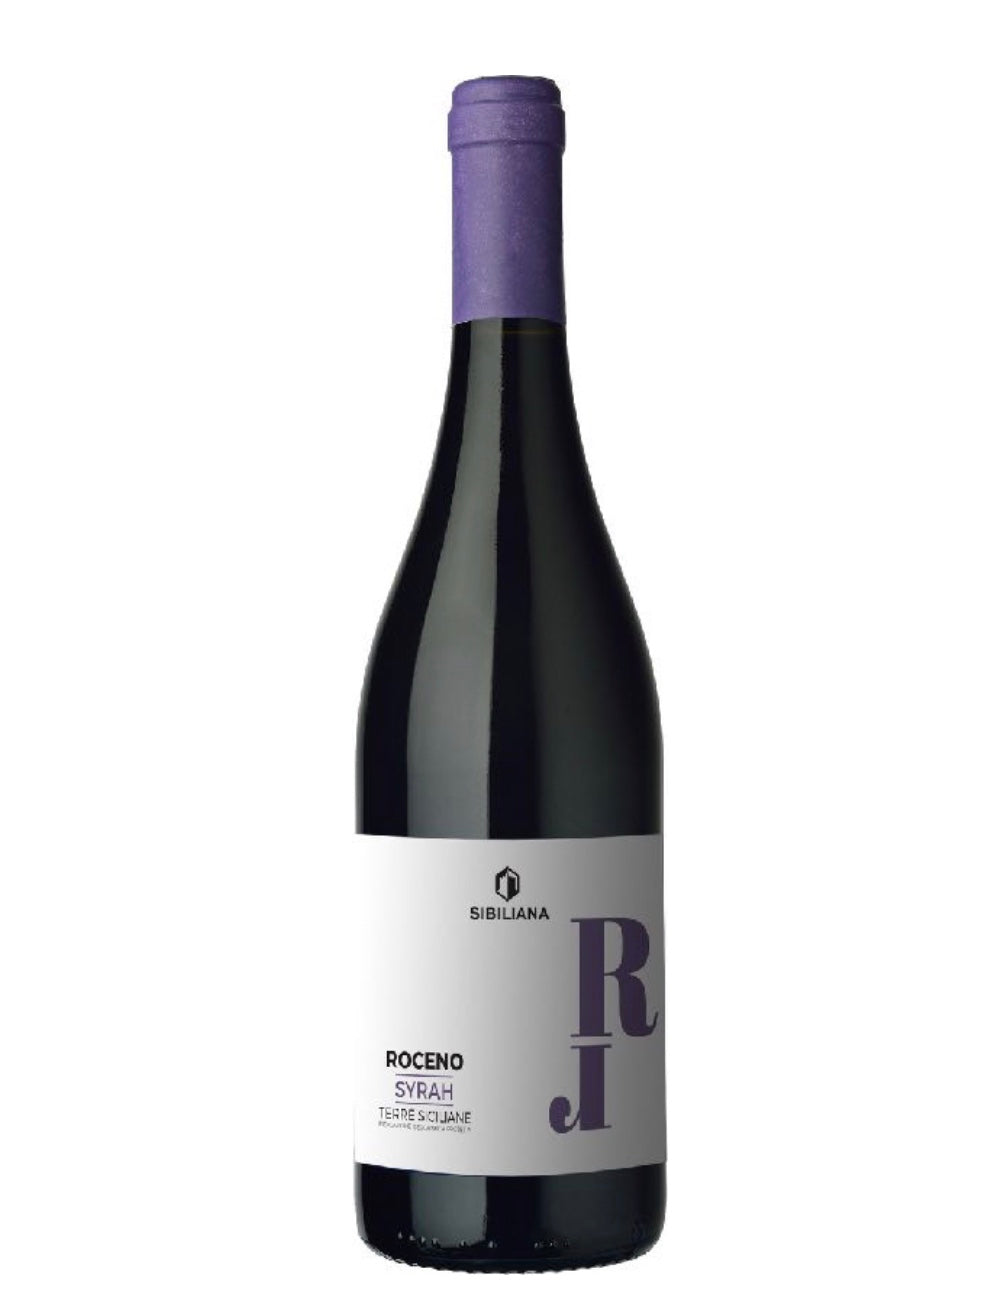 12 x Syrah IGP, Roceno, Sibiliana Vini, 75cl, DELIVERED WITHIN TWO WEEKS